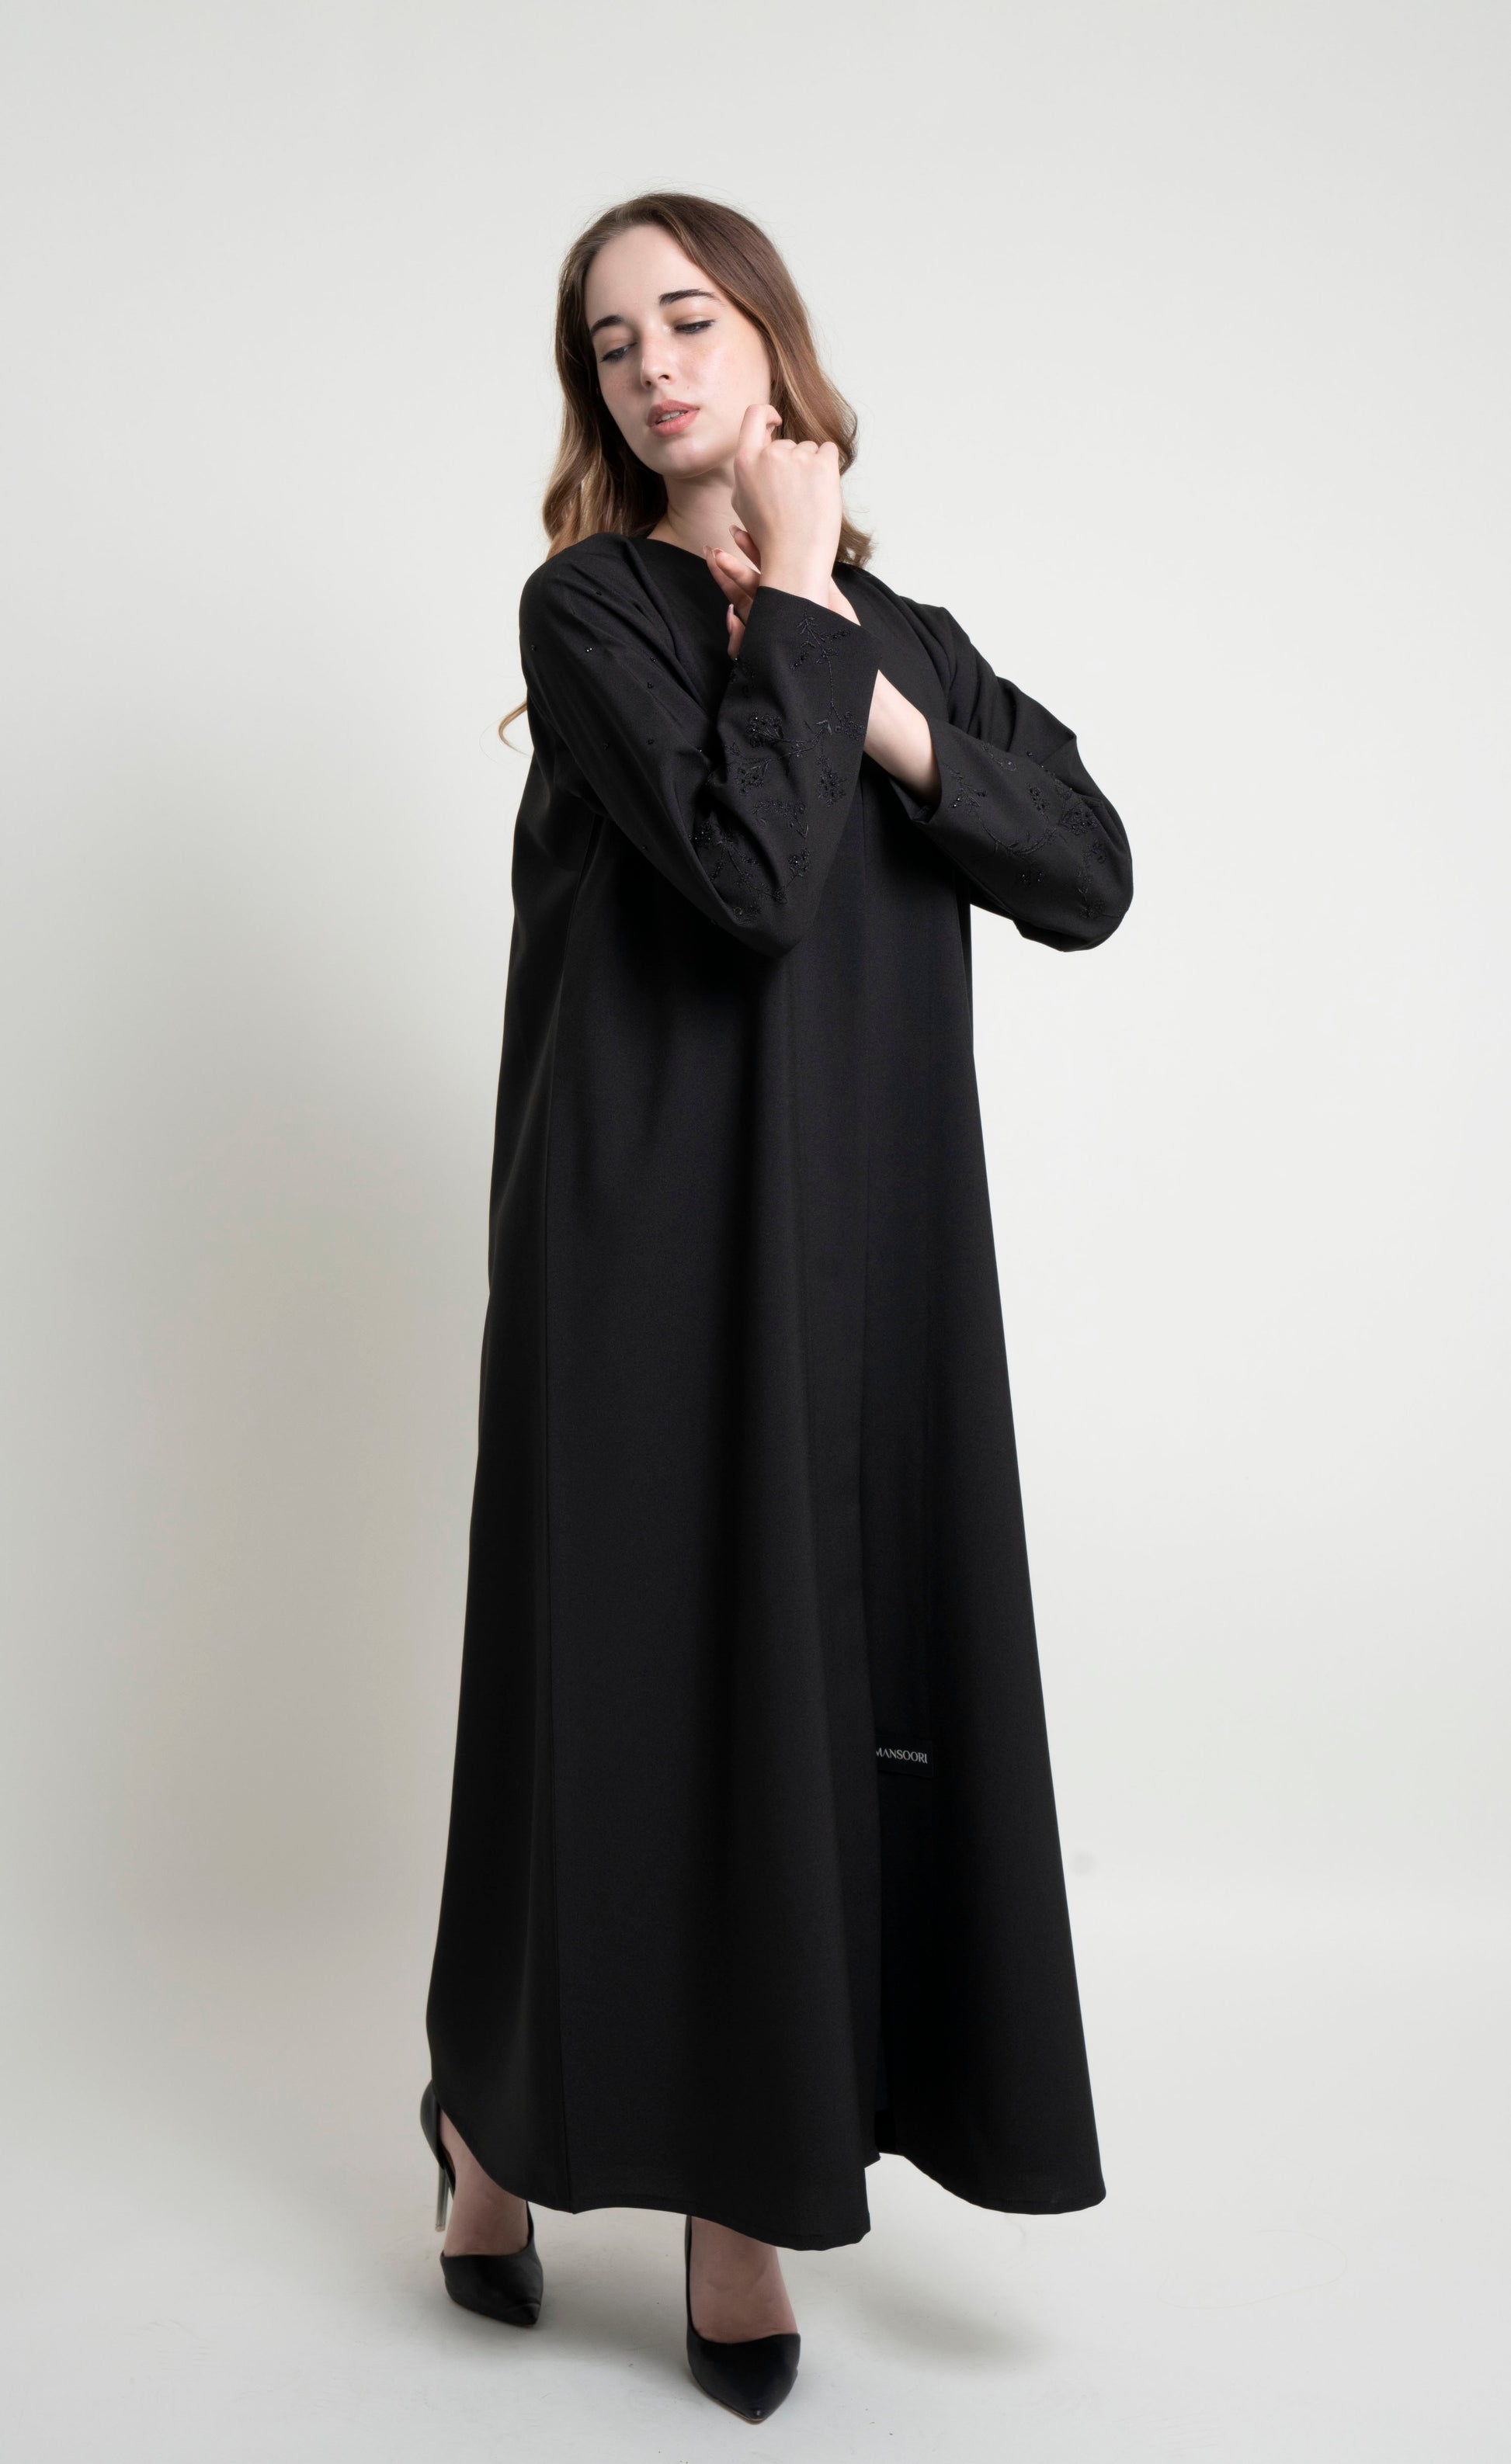 Girl wearing black abaya with embroidered sleeves 